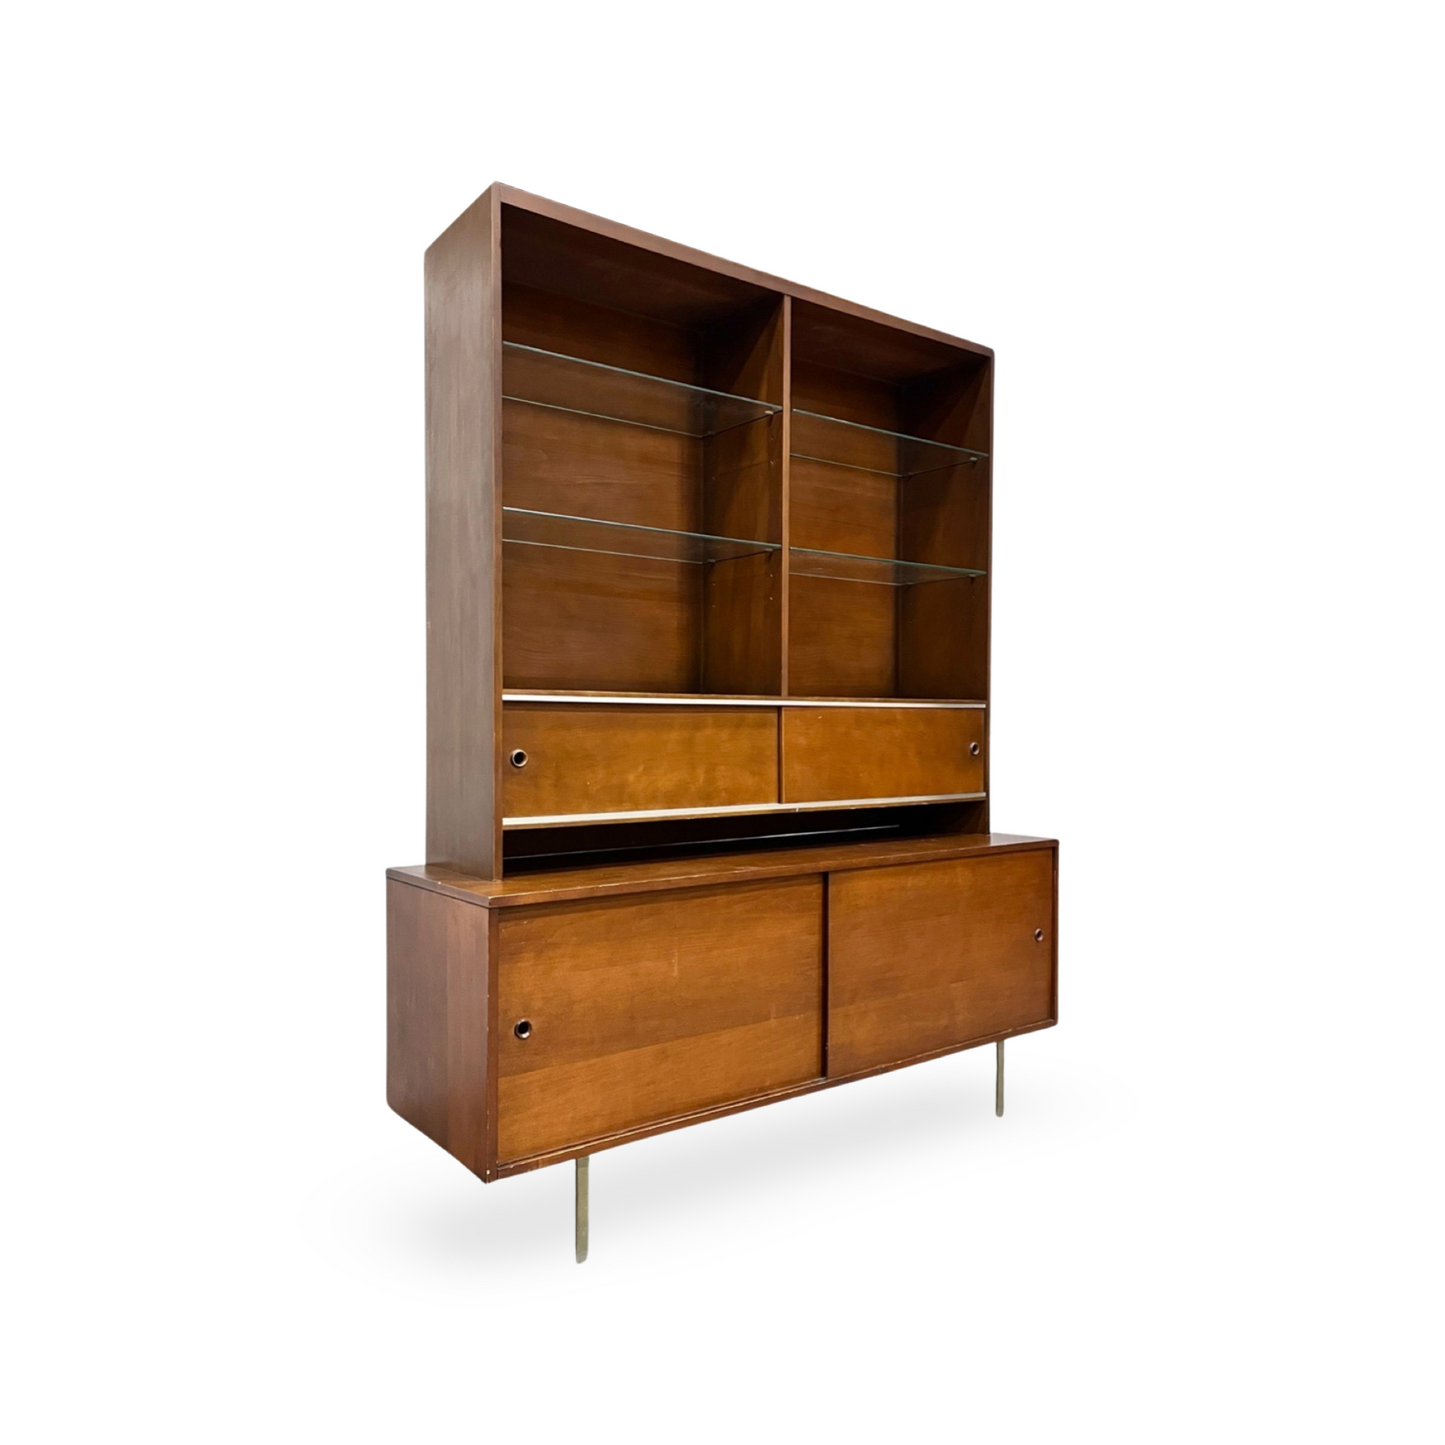 Paul Mccobb Vintage Mid Century Modern Perimeter Group Hutch and Planner Group Buffet c. 1950s